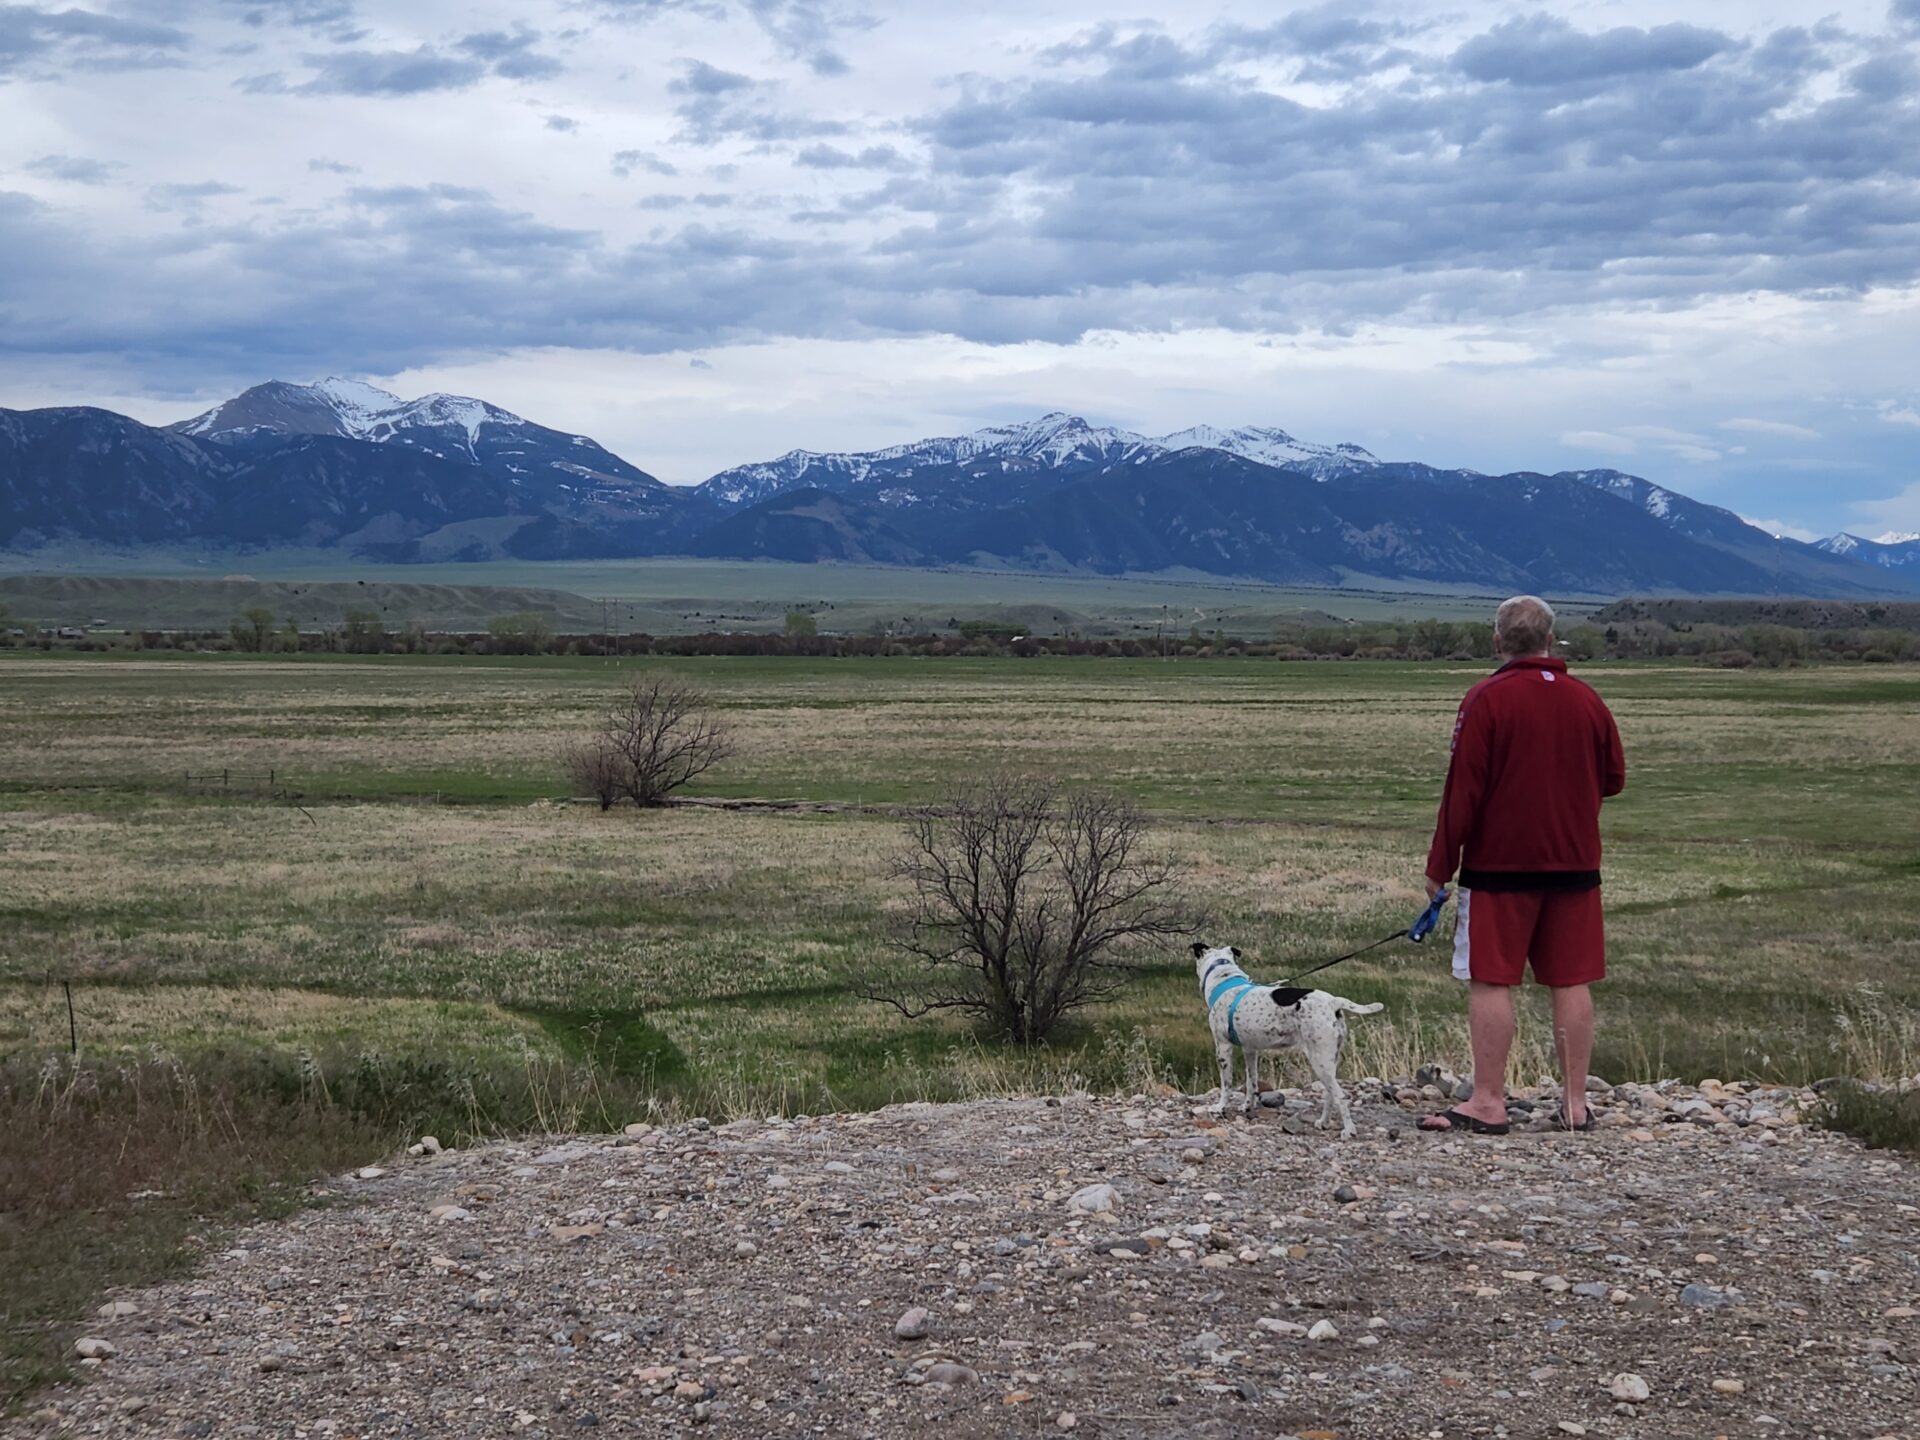 Ennis, MT: A Drinking Town With A Fishing Problem - Charming RV Adventures